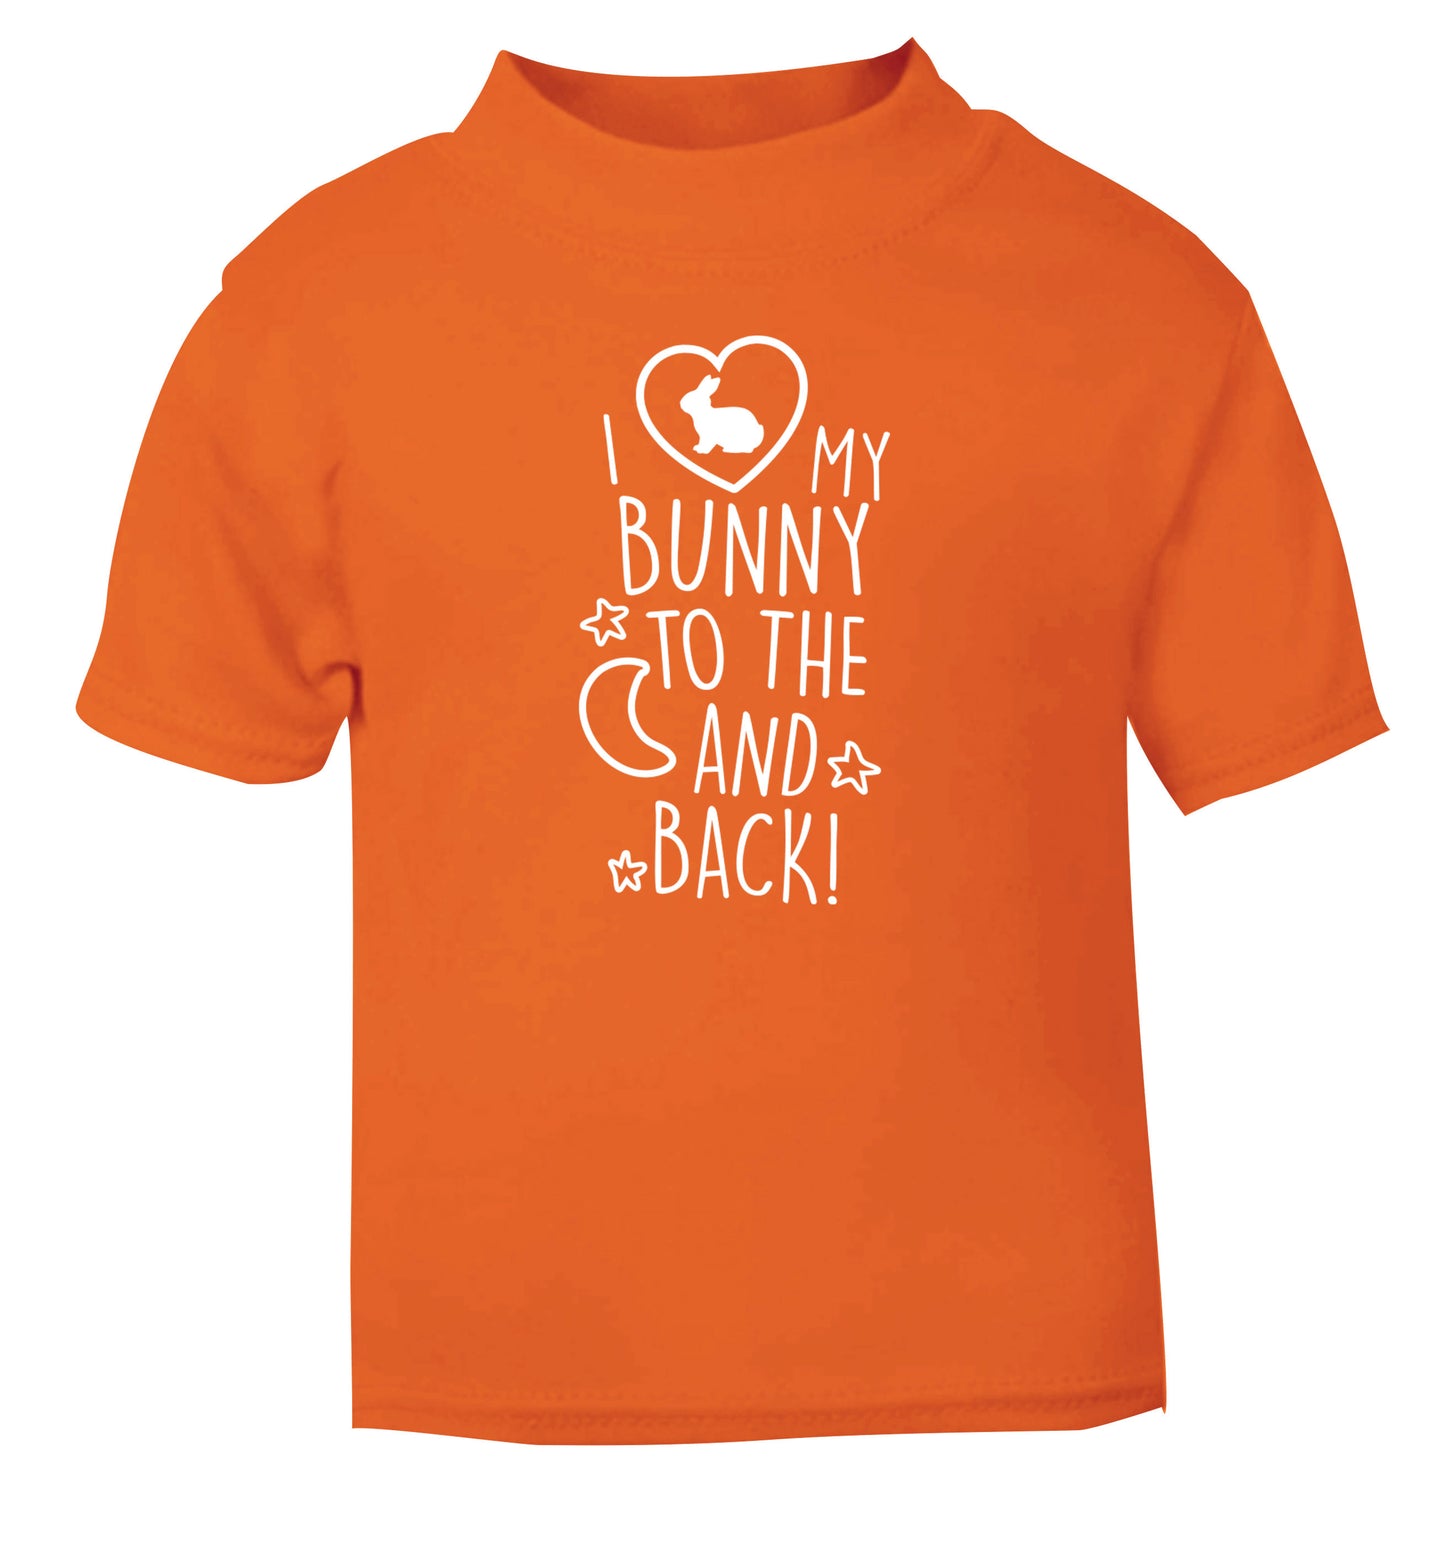 I love my bunny to the moon and back orange Baby Toddler Tshirt 2 Years